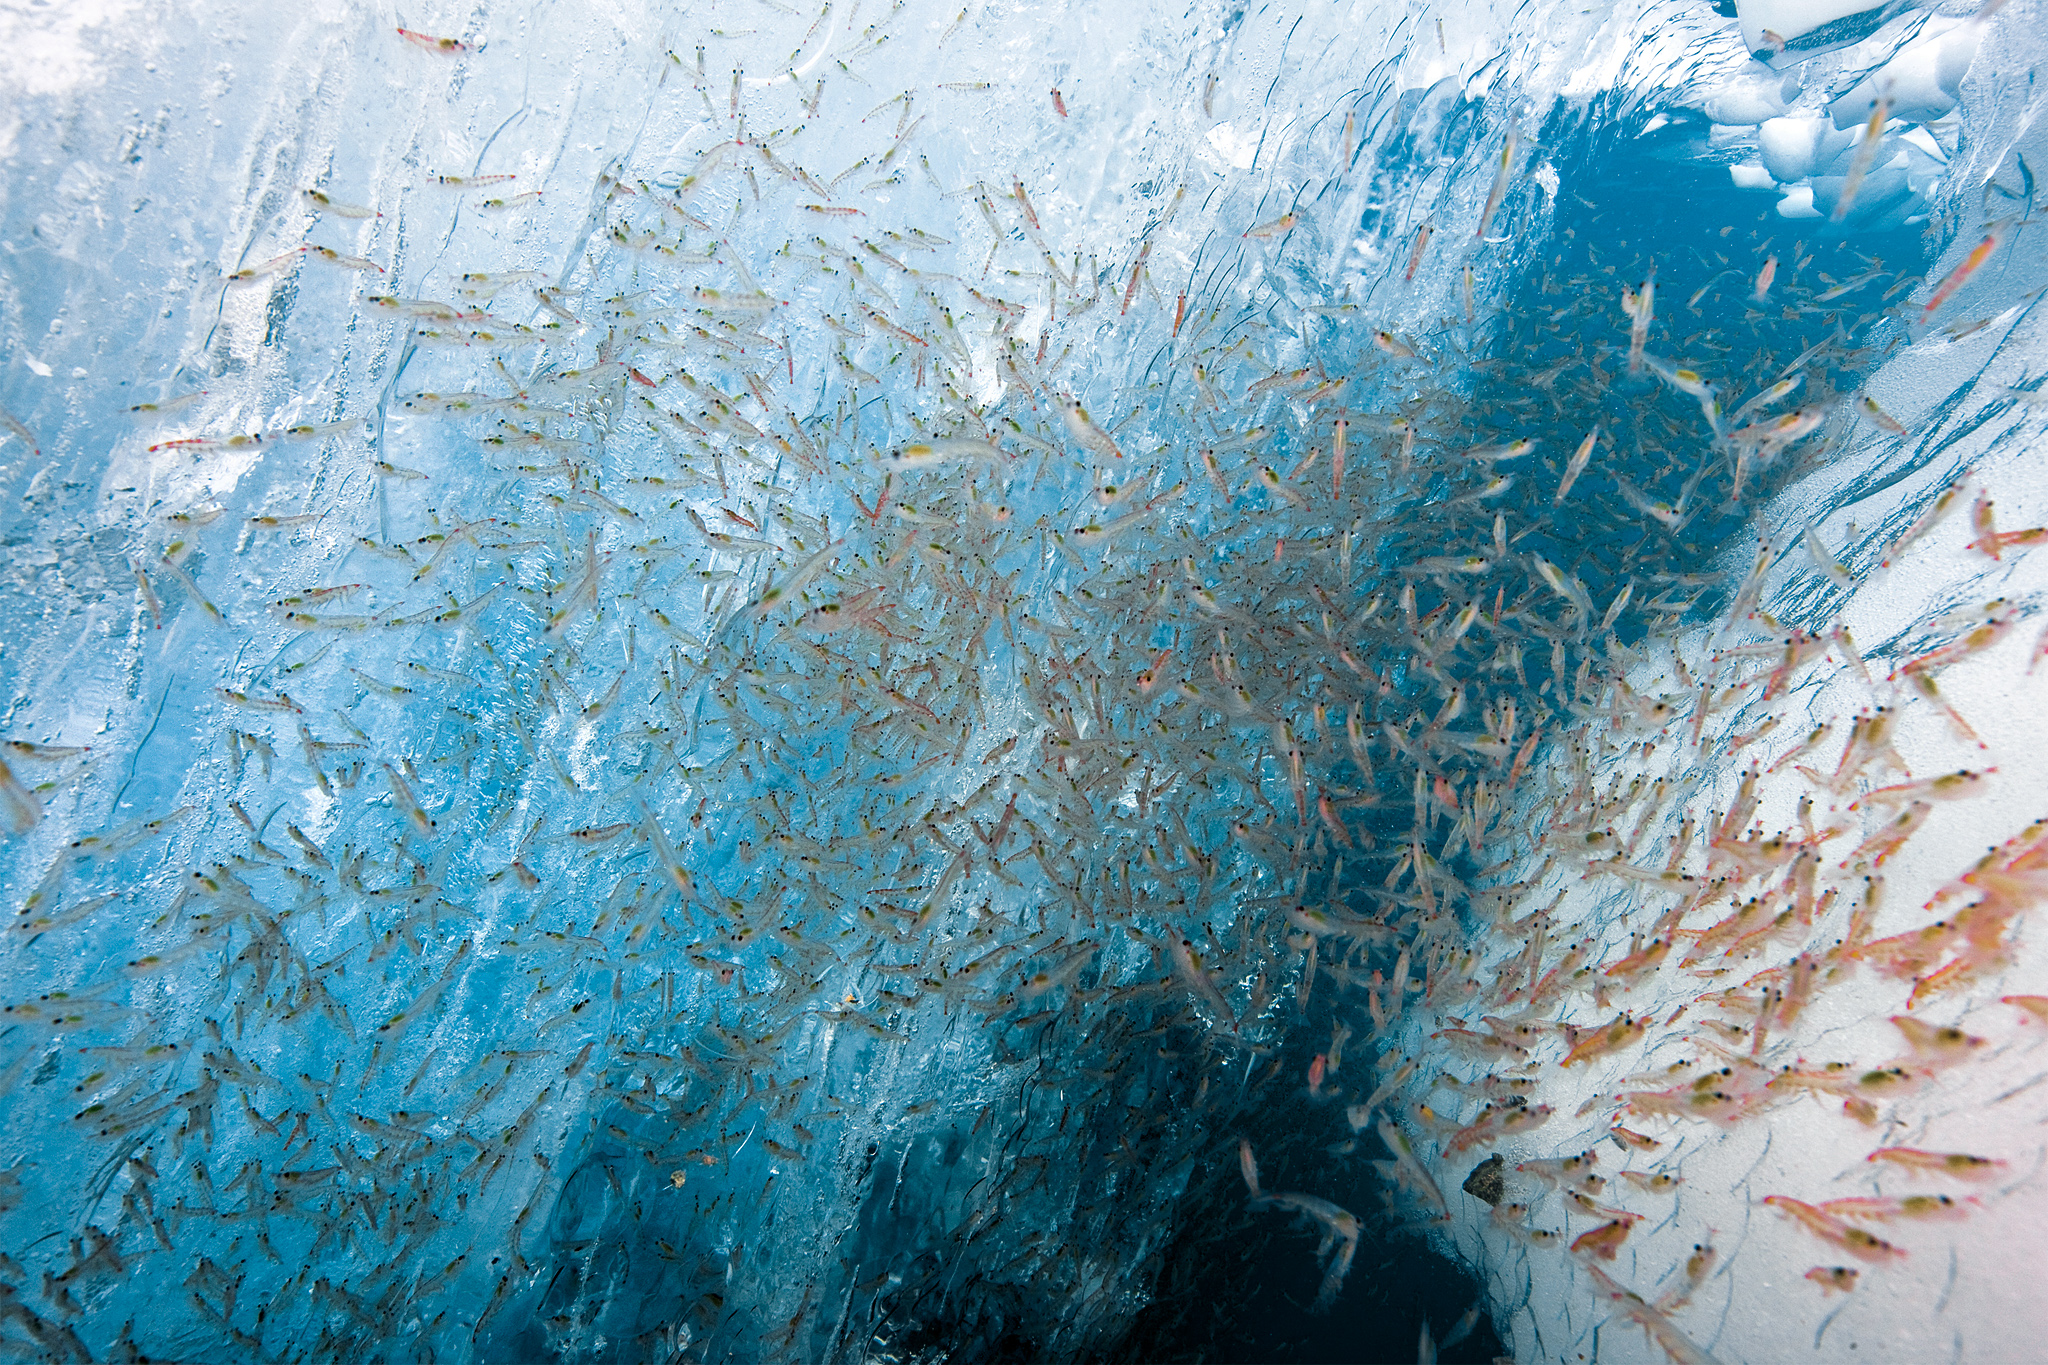 Krill feeds on phytoplankton that grows on the underside of sea ice.